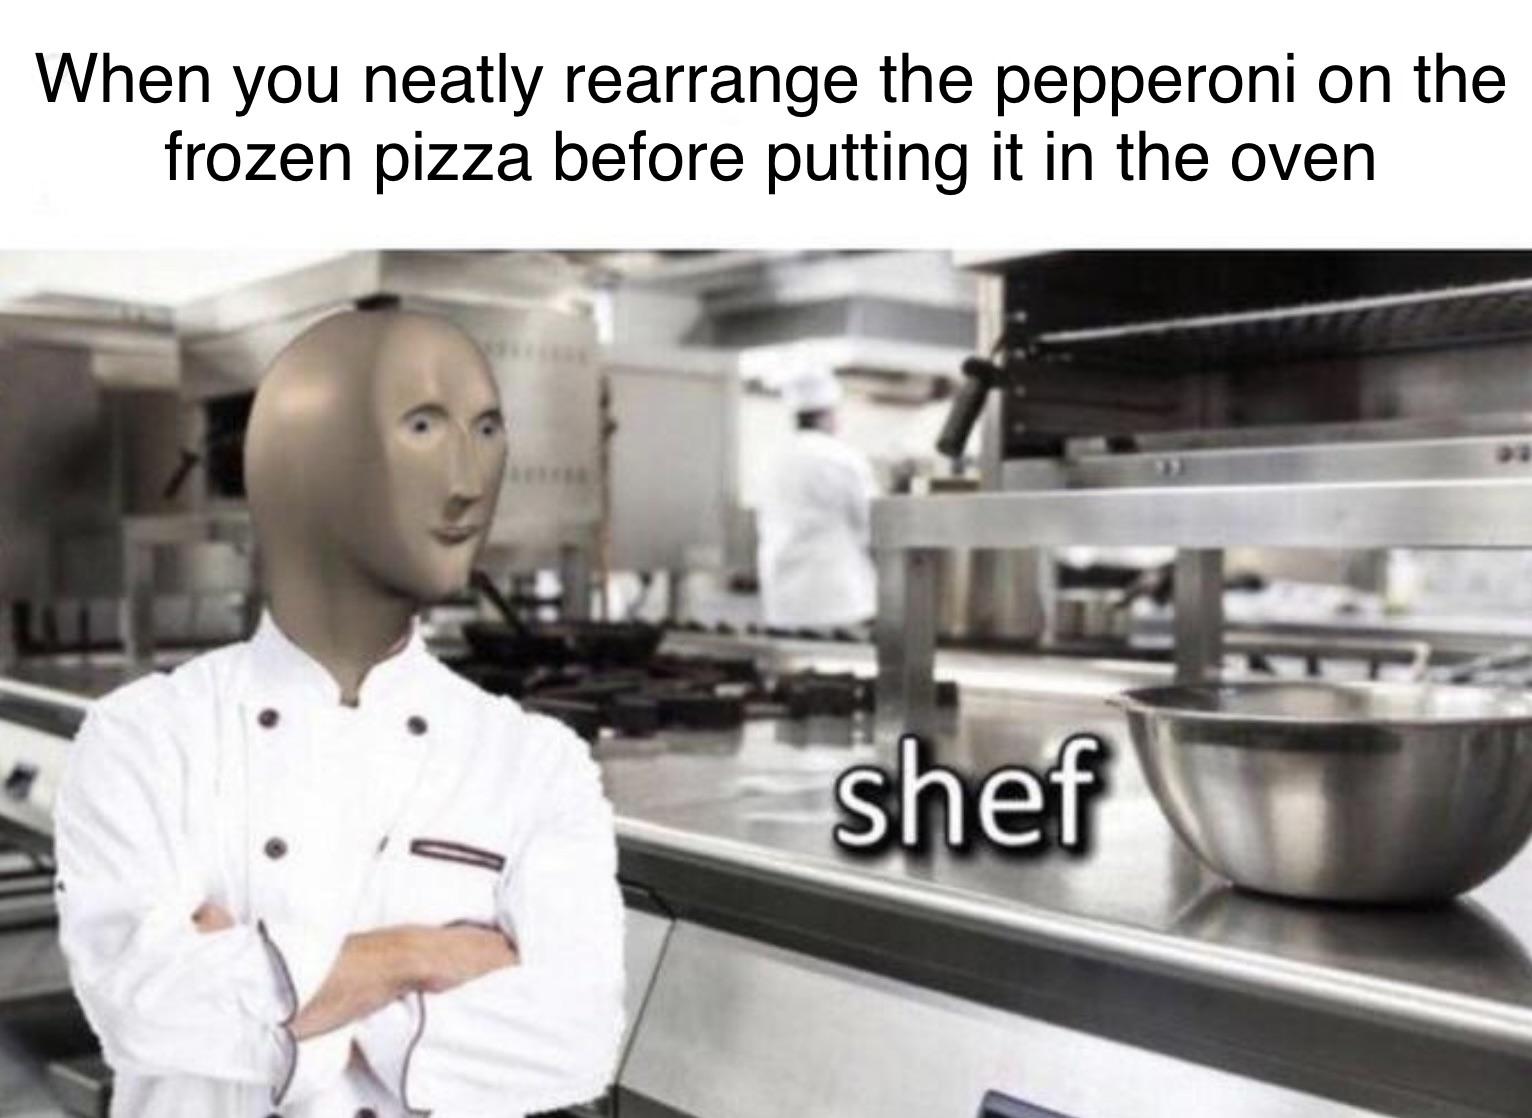 funny memes and pics  - chef - When you neatly rearrange the pepperoni on the frozen pizza before putting it in the oven shef